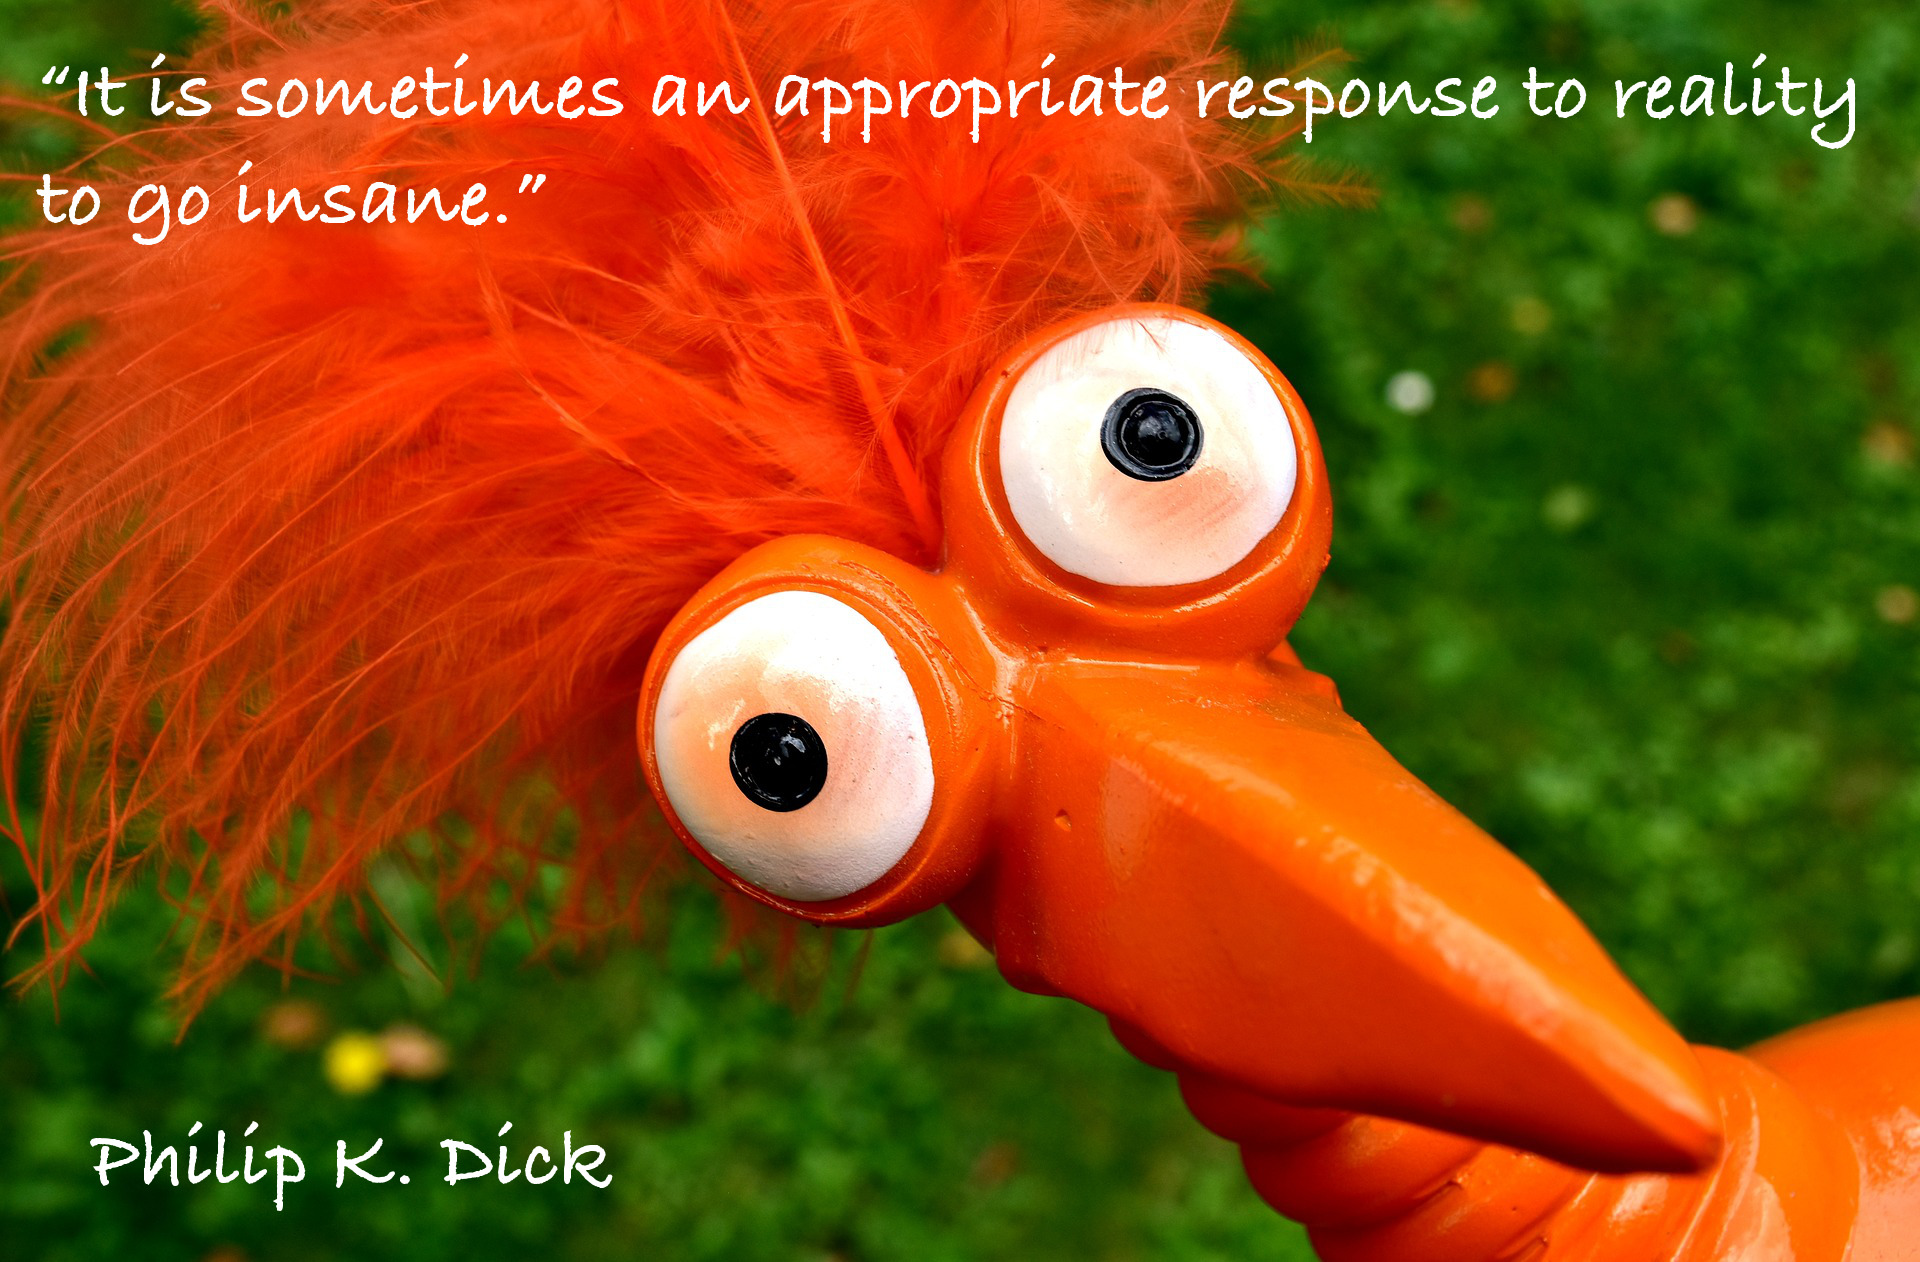 It is sometimes an appropriate response to reality to go insane.